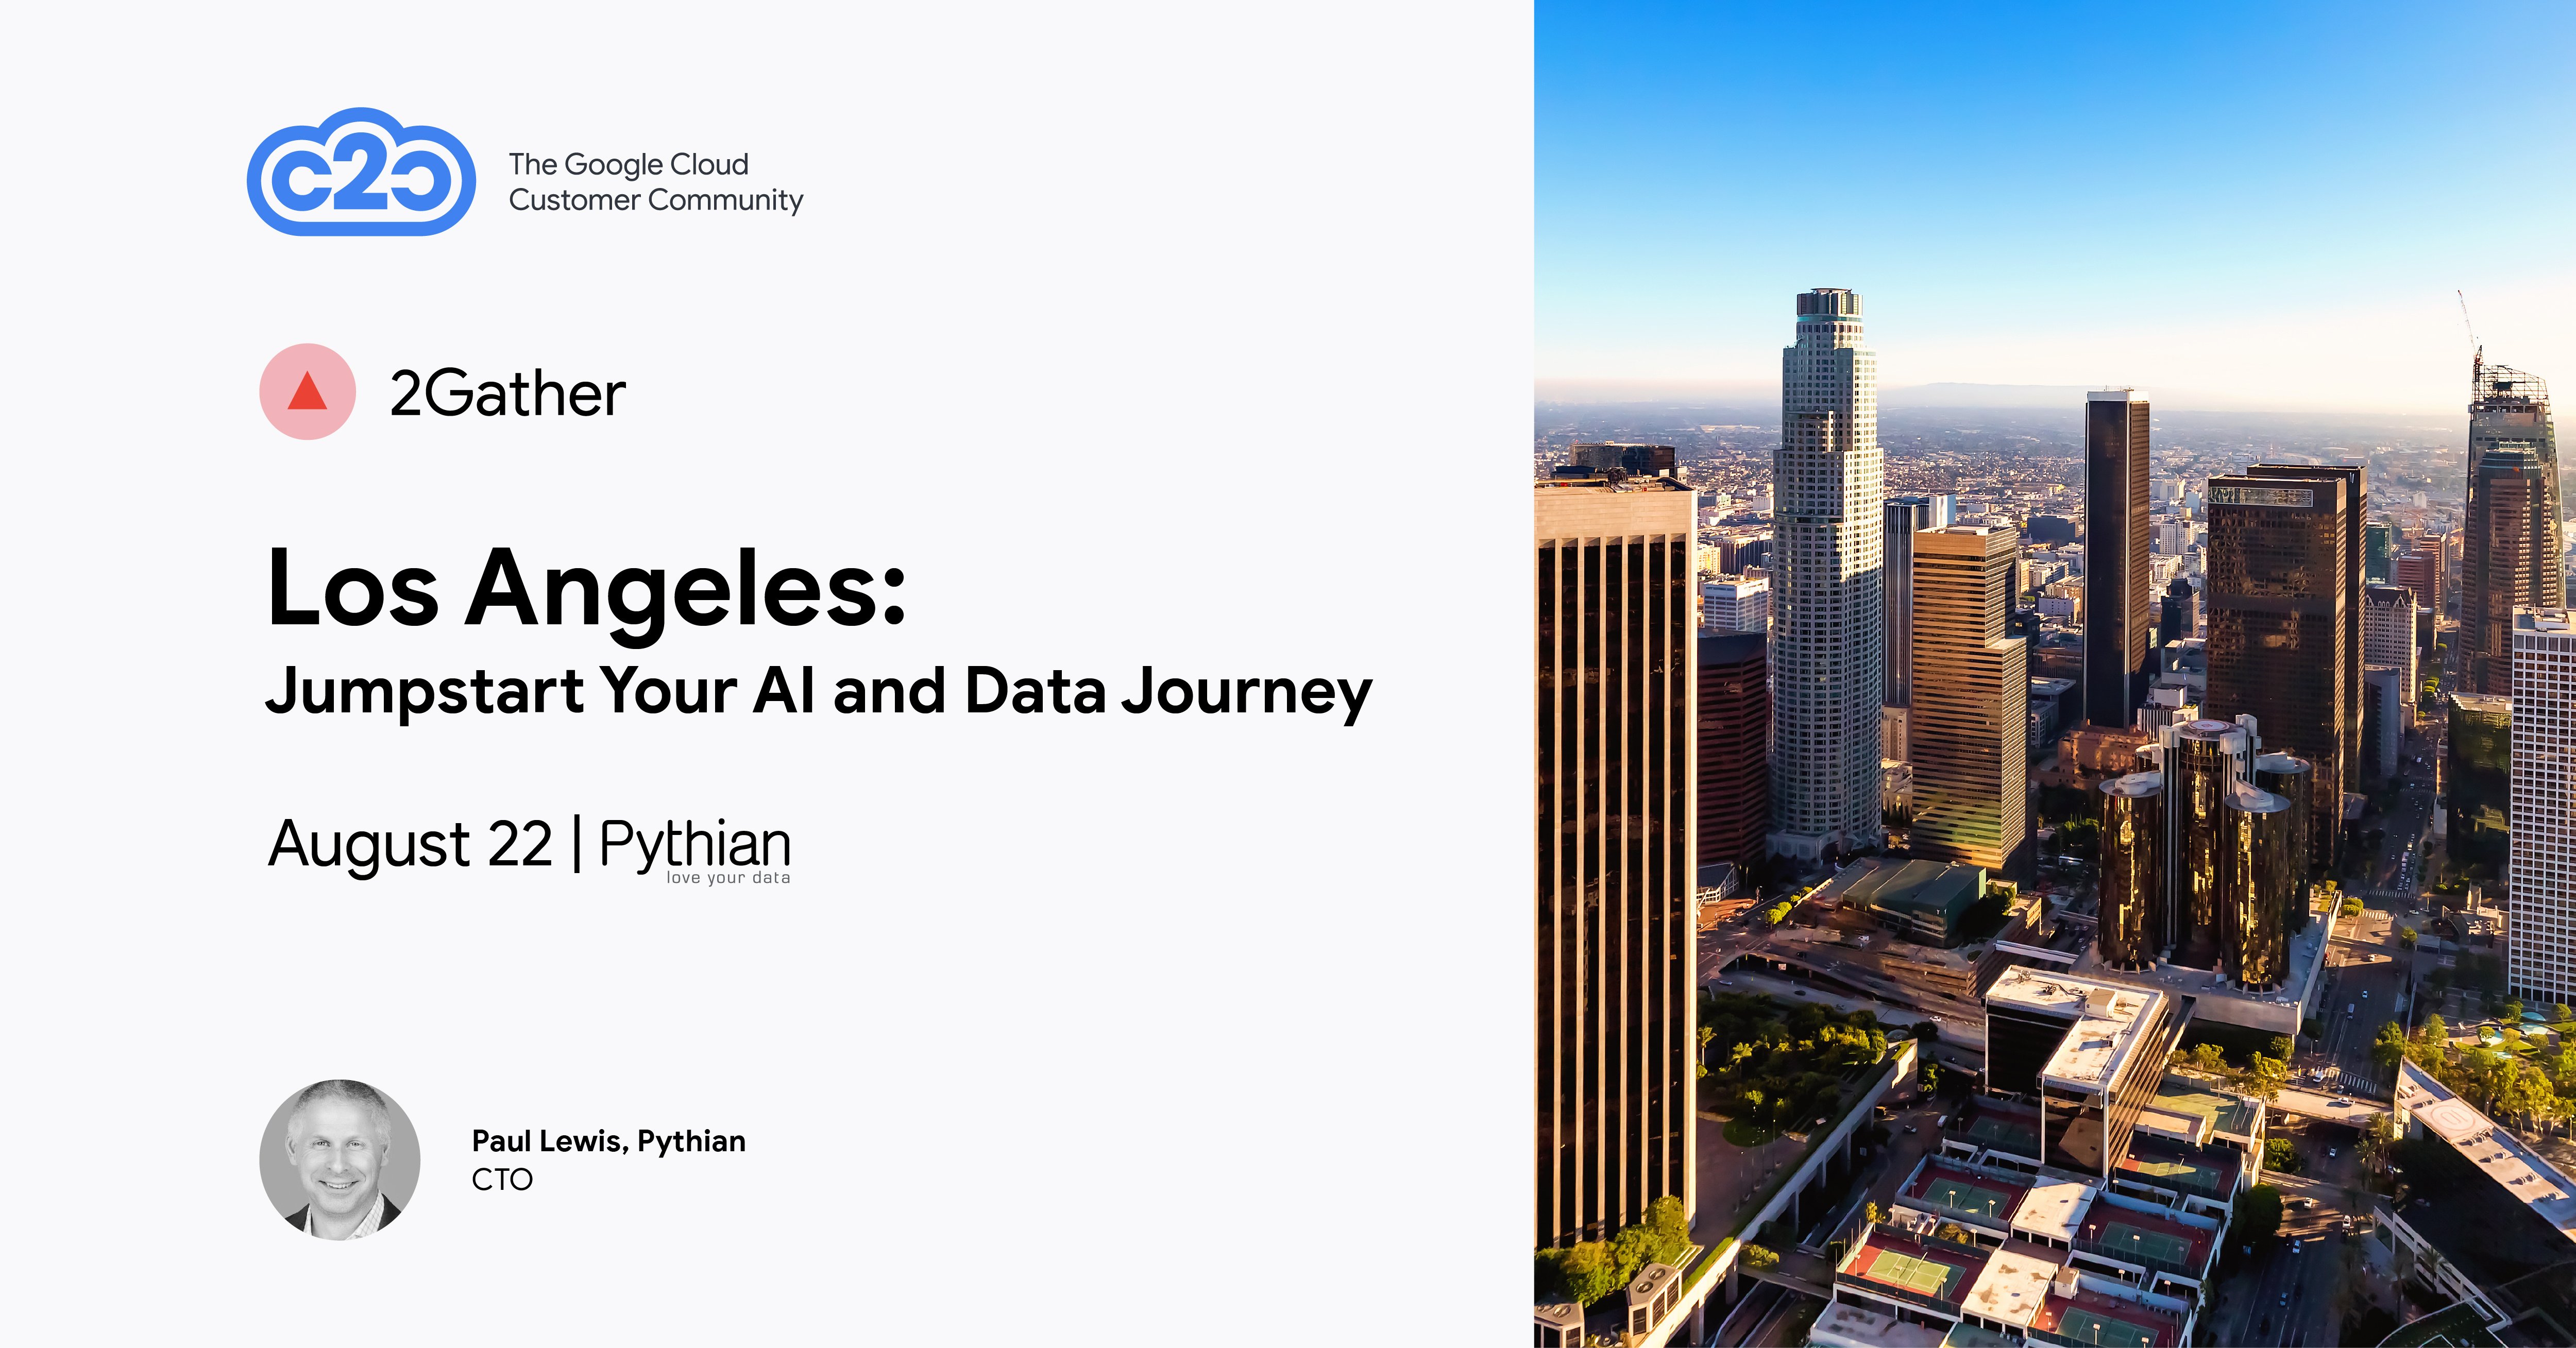 2Gather Los Angeles: Jumpstart Your AI and Data Journey